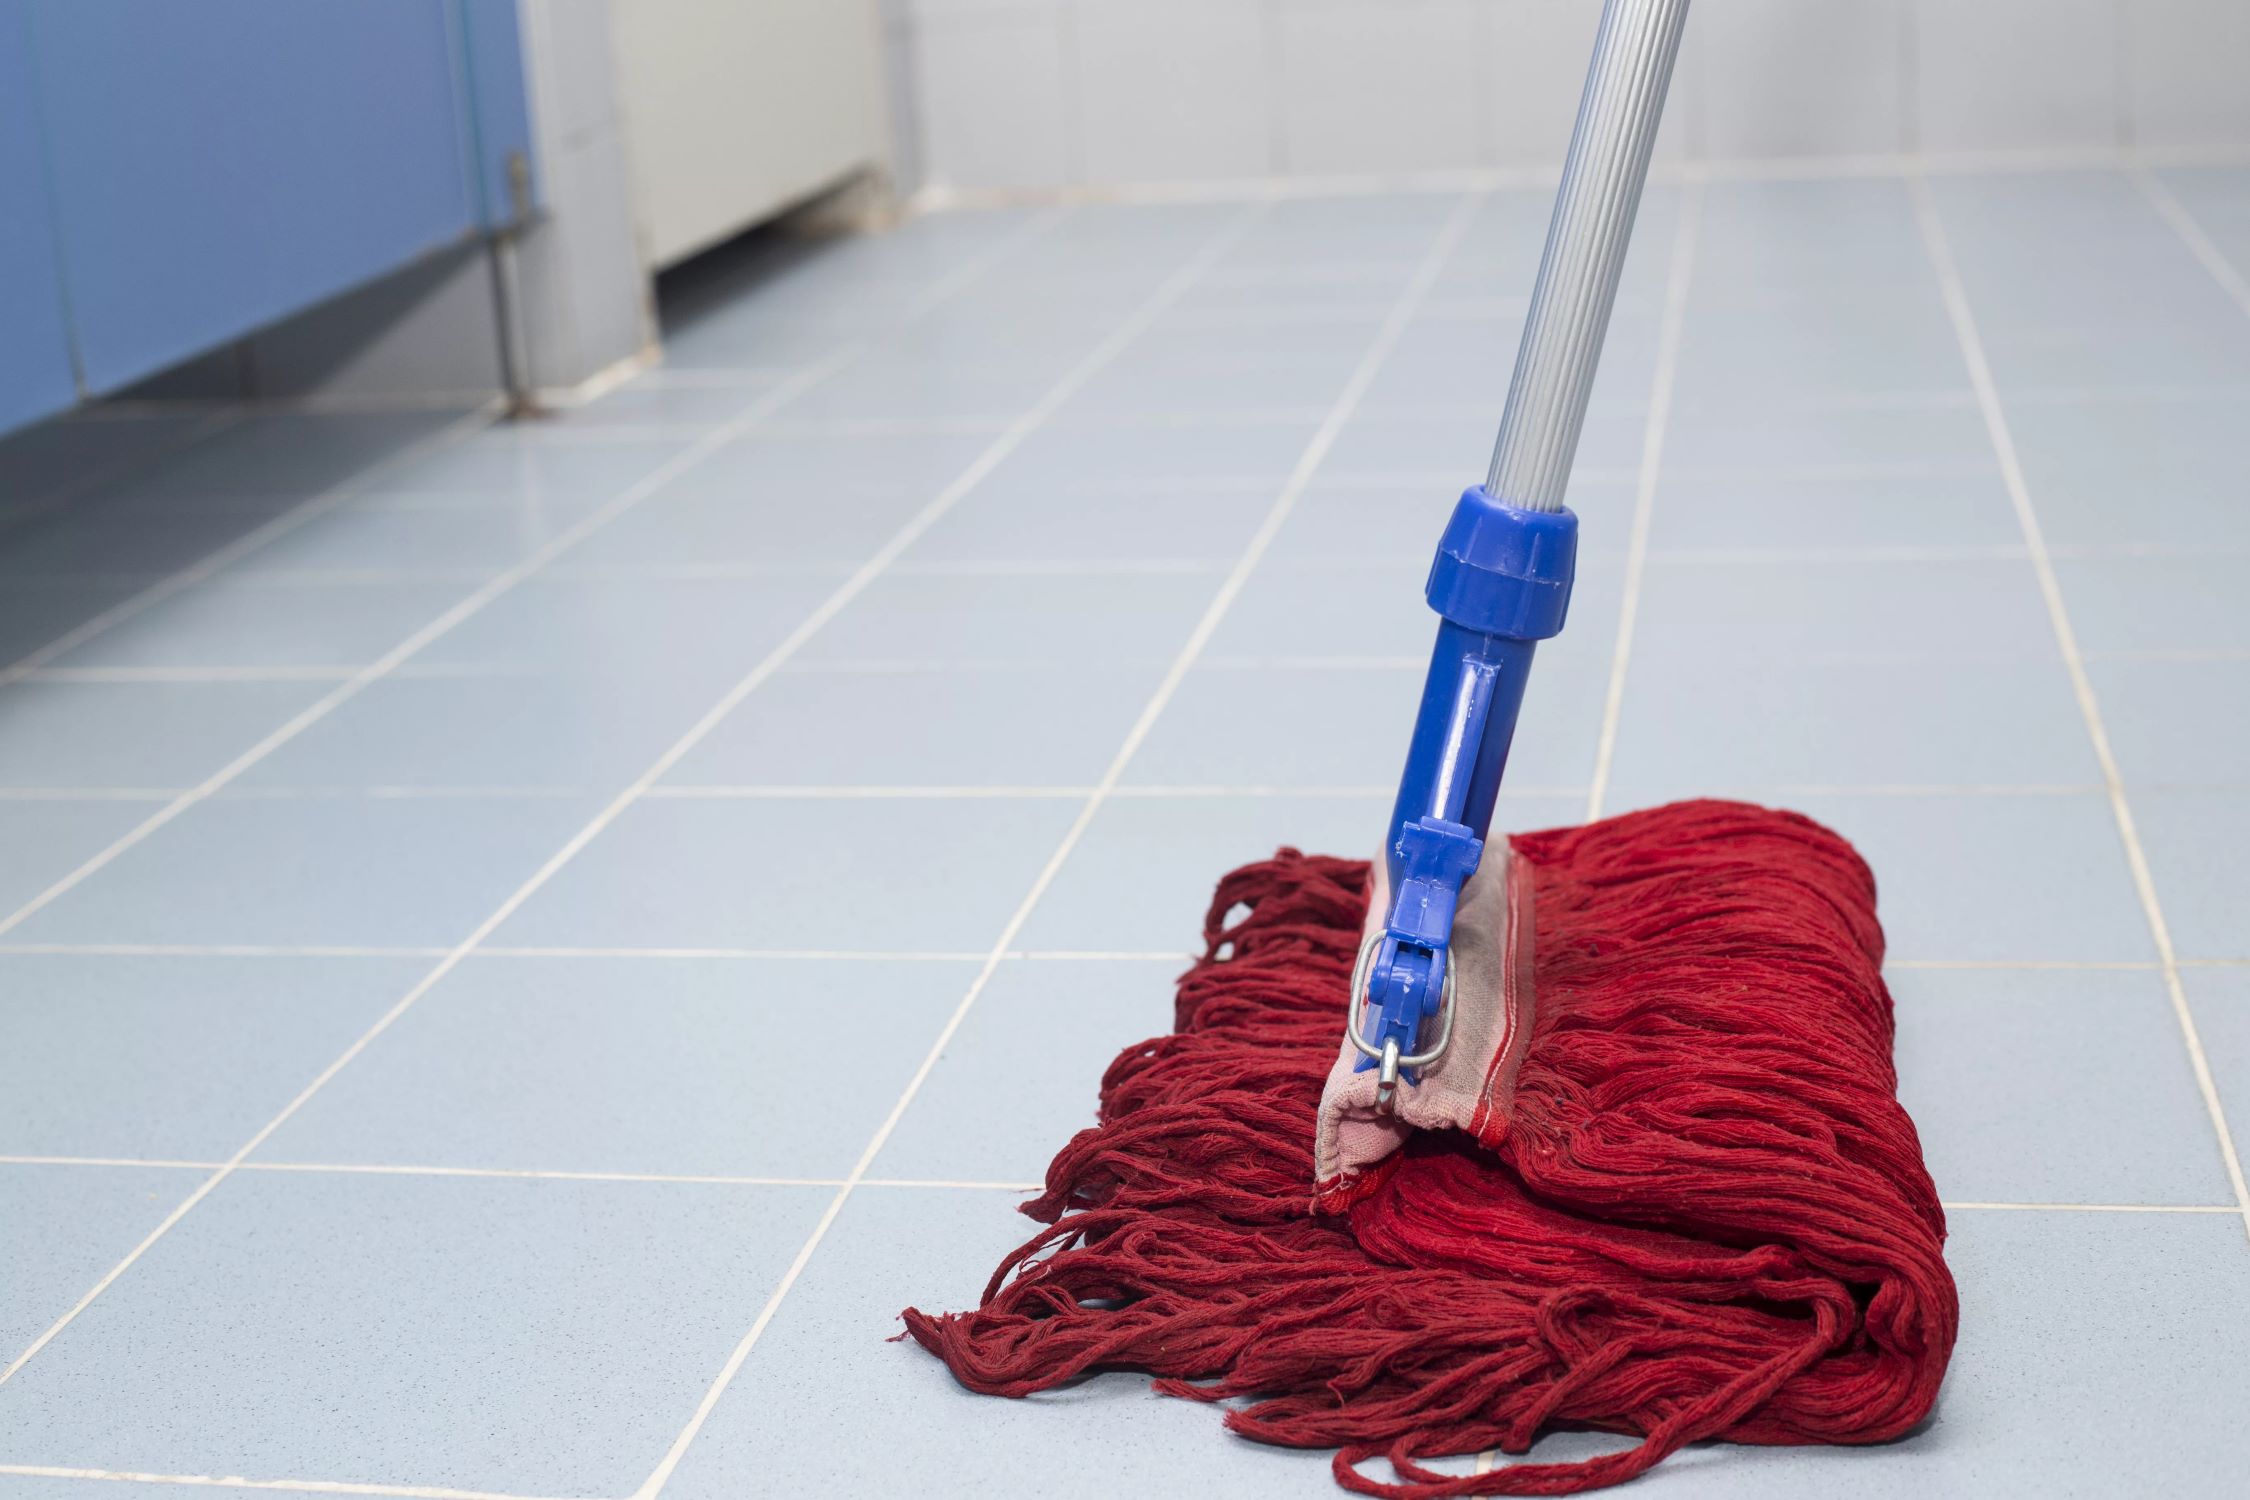 How To Mop A Floor | Storables